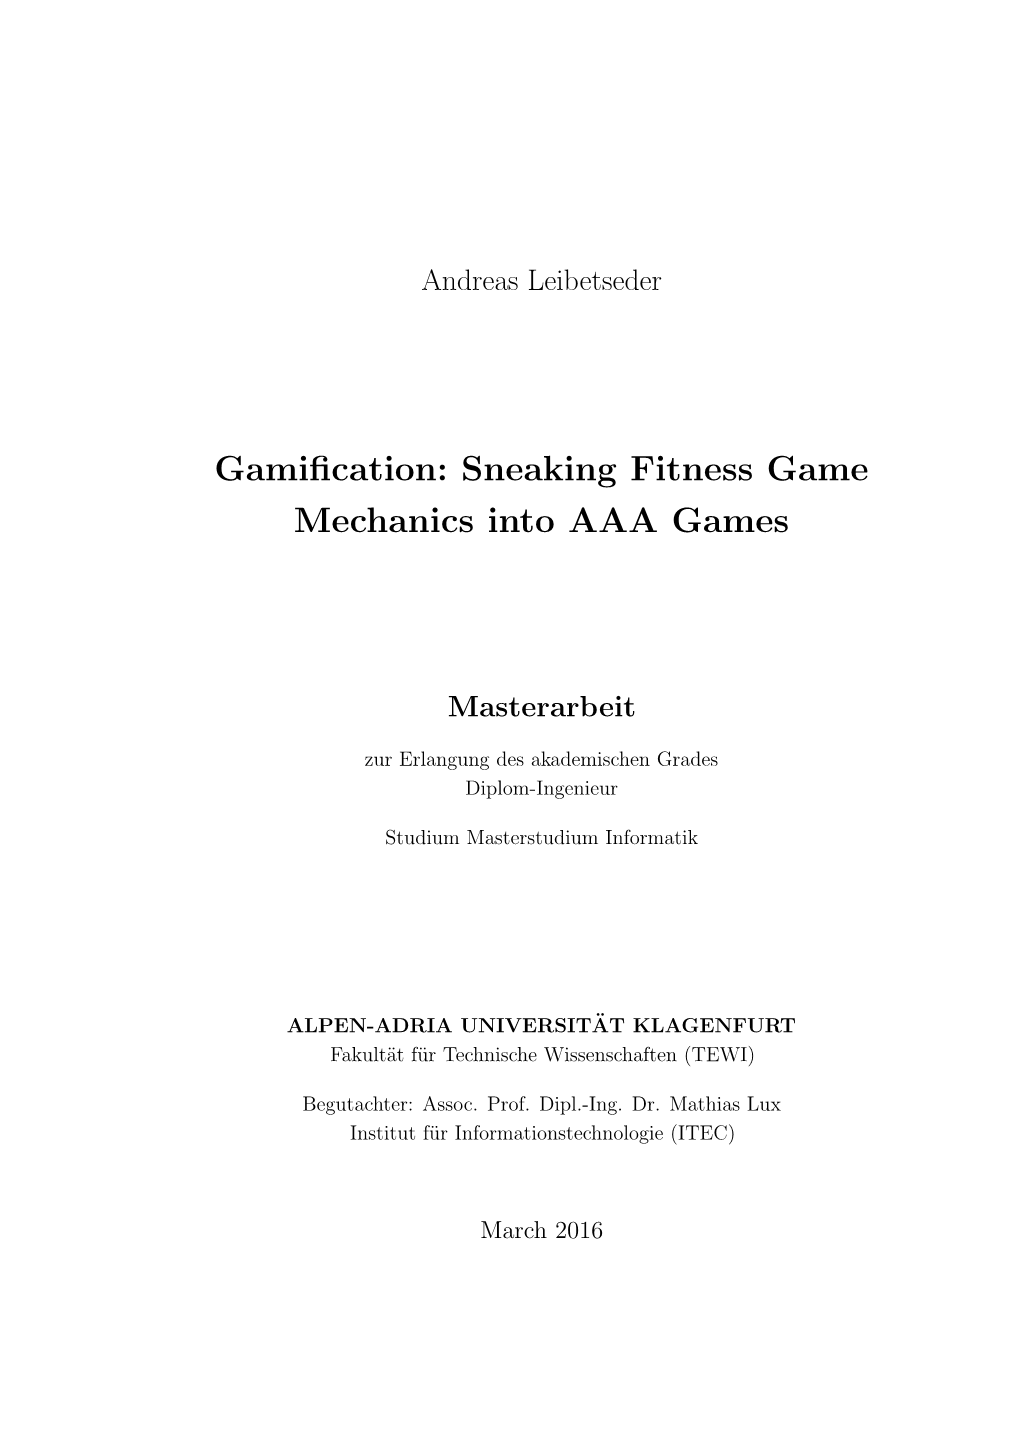 Gamification: Sneaking Fitness Game Mechanics Into AAA Games